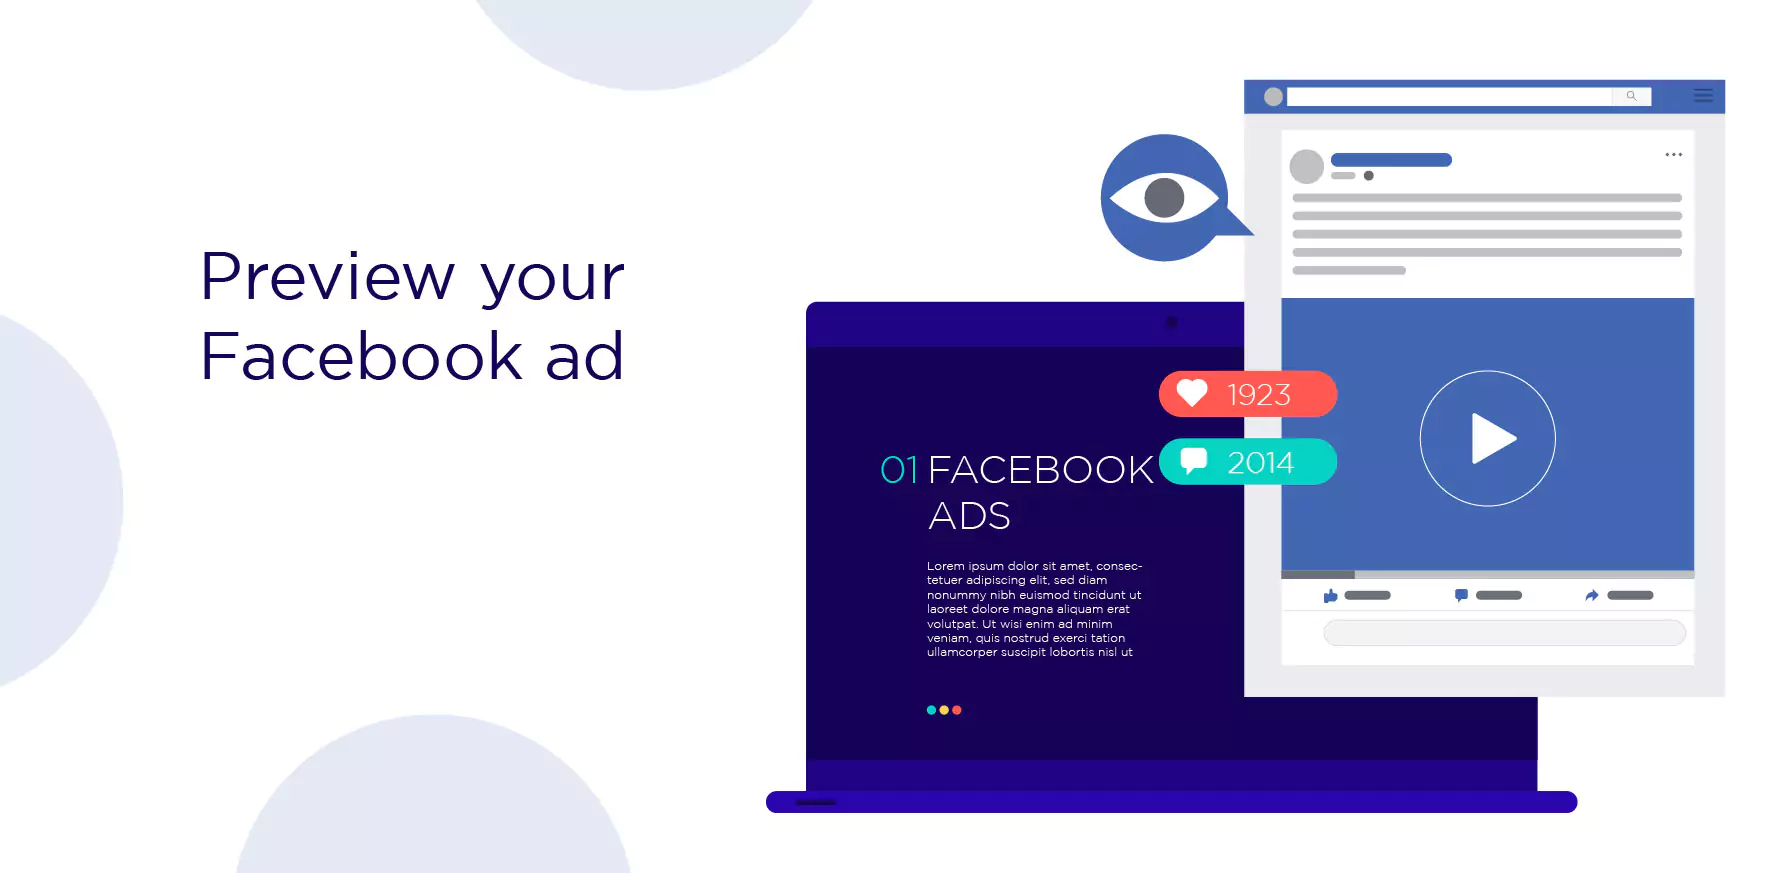 Preview your Facebook ad